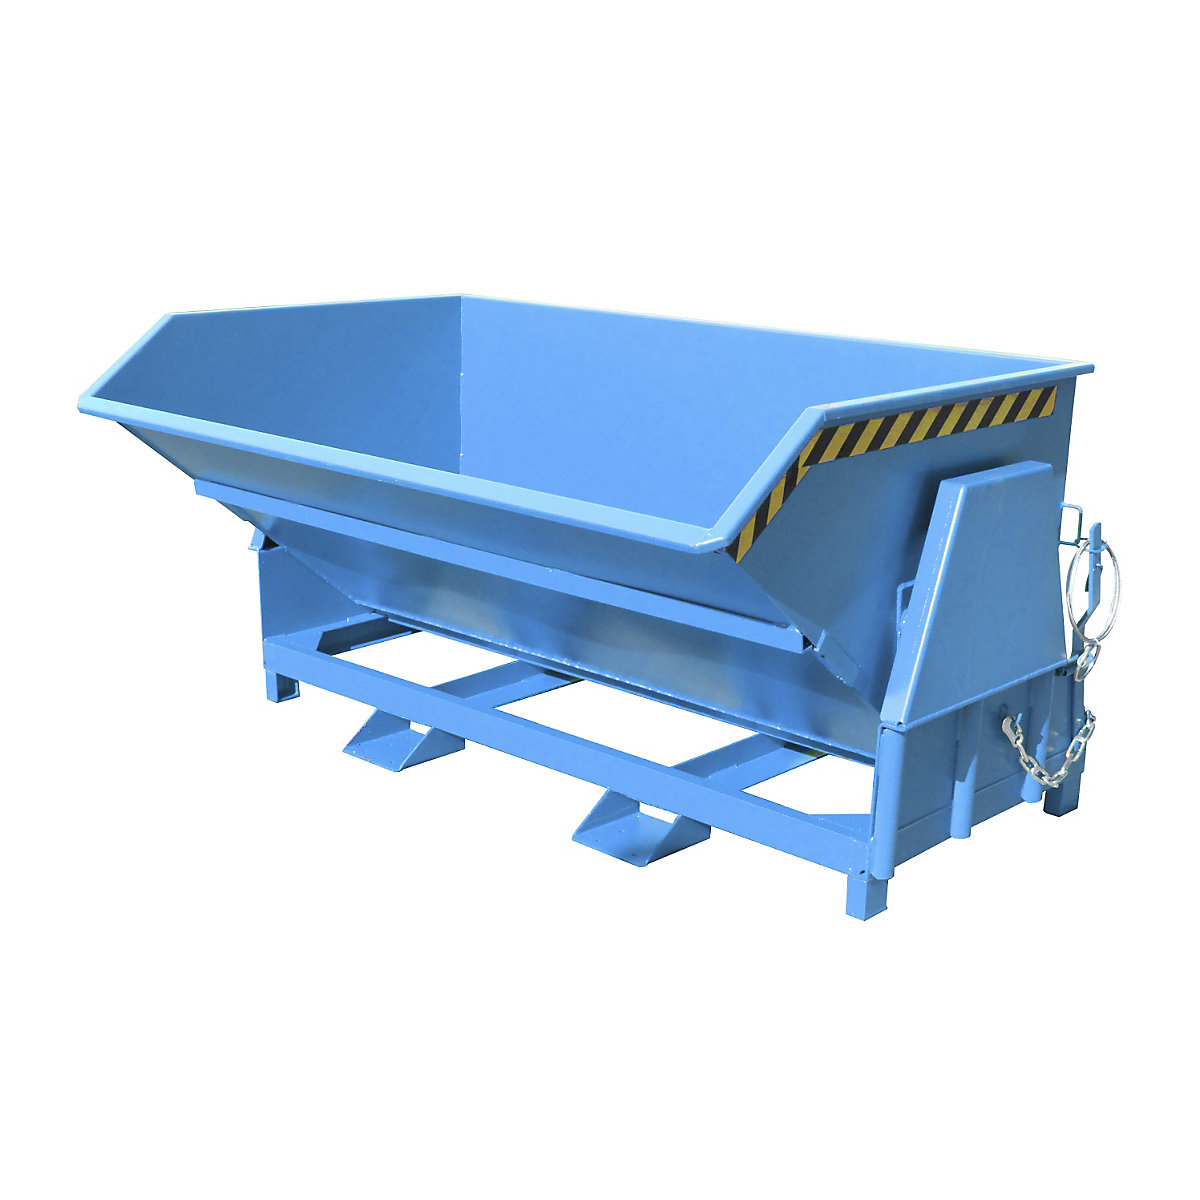 Tilting skip, standard overall height, without wheels – eurokraft pro, capacity 2.0 m³, painted light blue RAL 5012-11